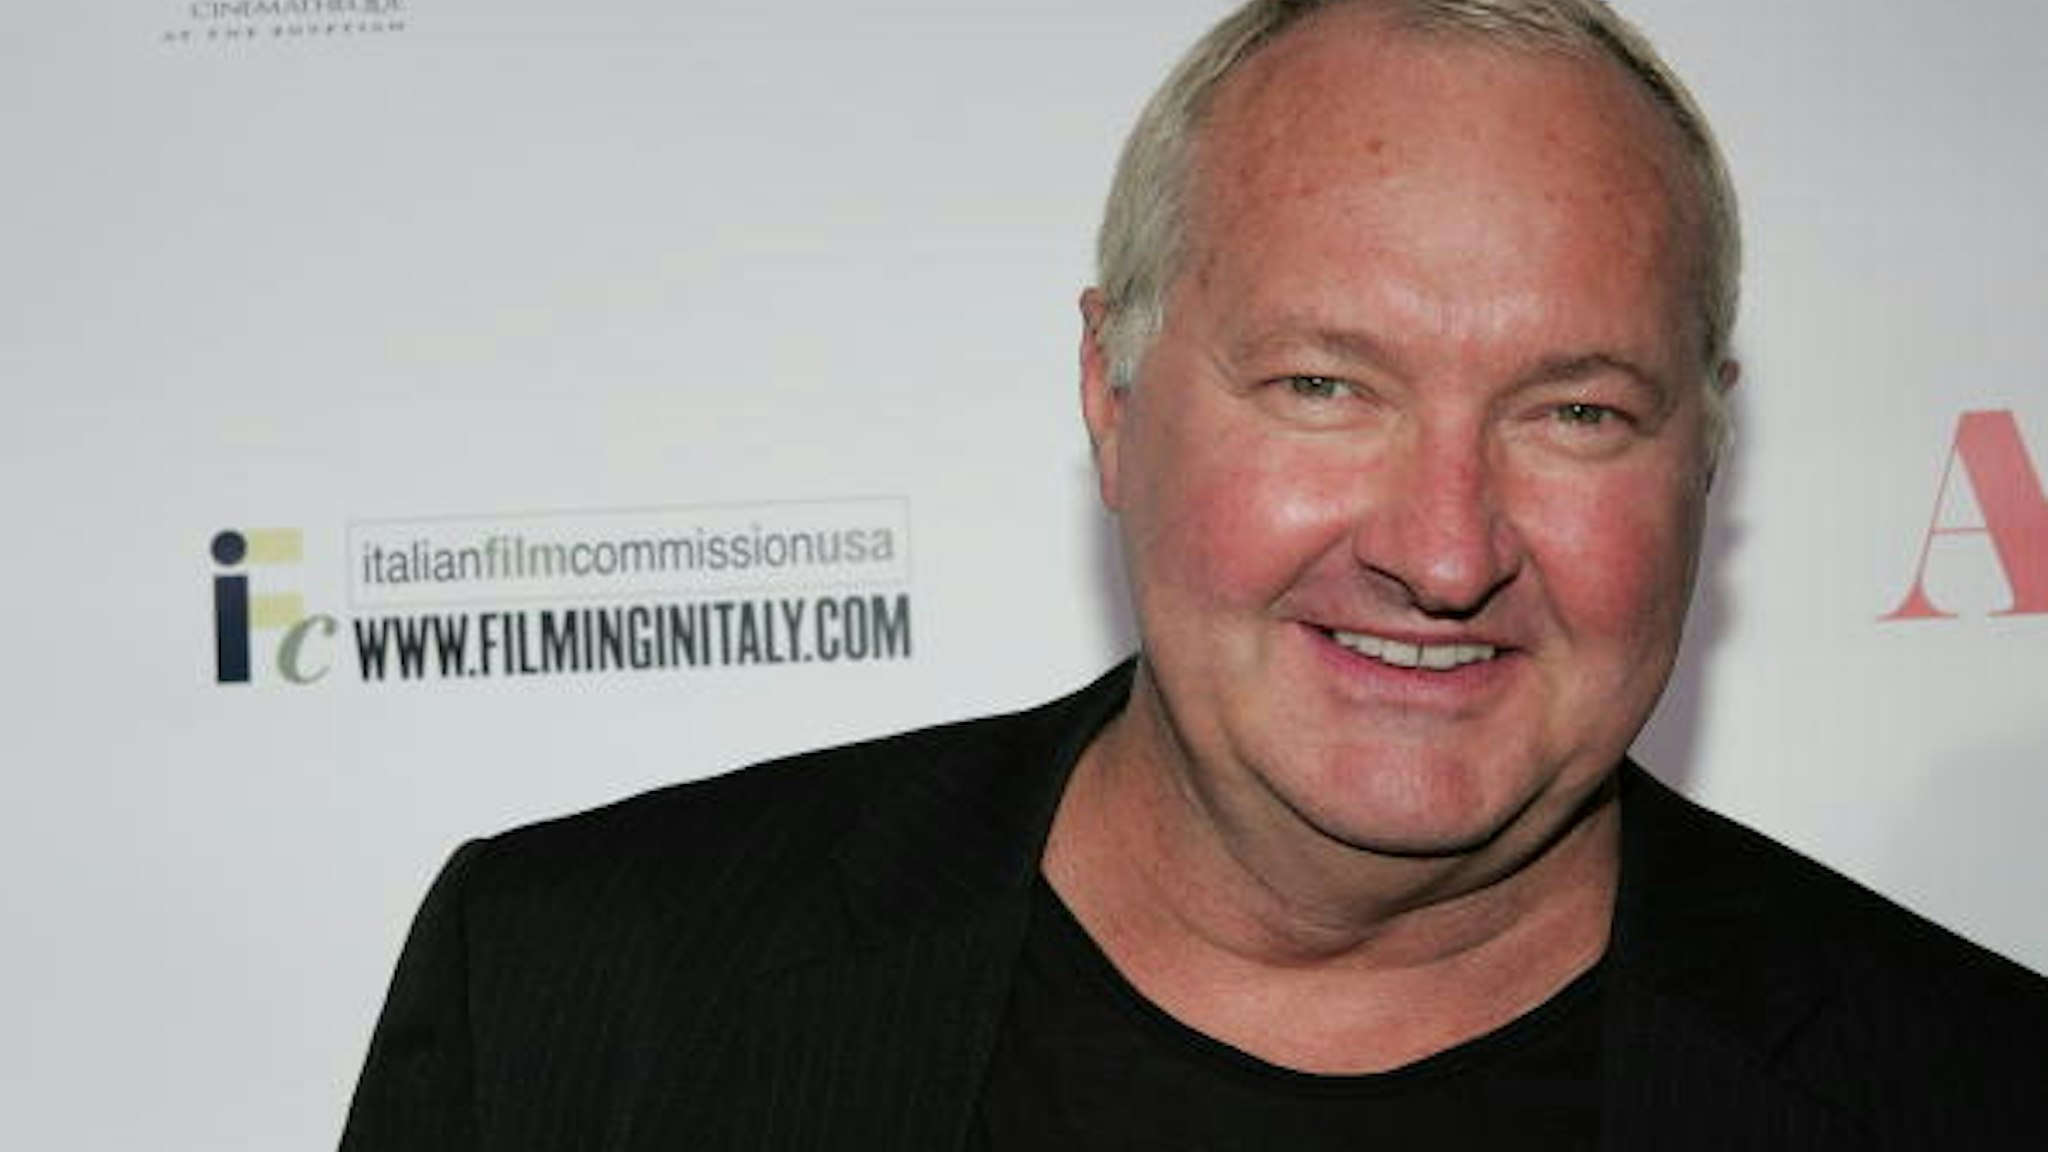 HOLLYWOOD - NOVEMBER 11: Actor Randy Quaid attends American Cinematheque's screening of "Gomorrah" at the Egyptian Theater on November 11, 2008 in Hollywood, California.